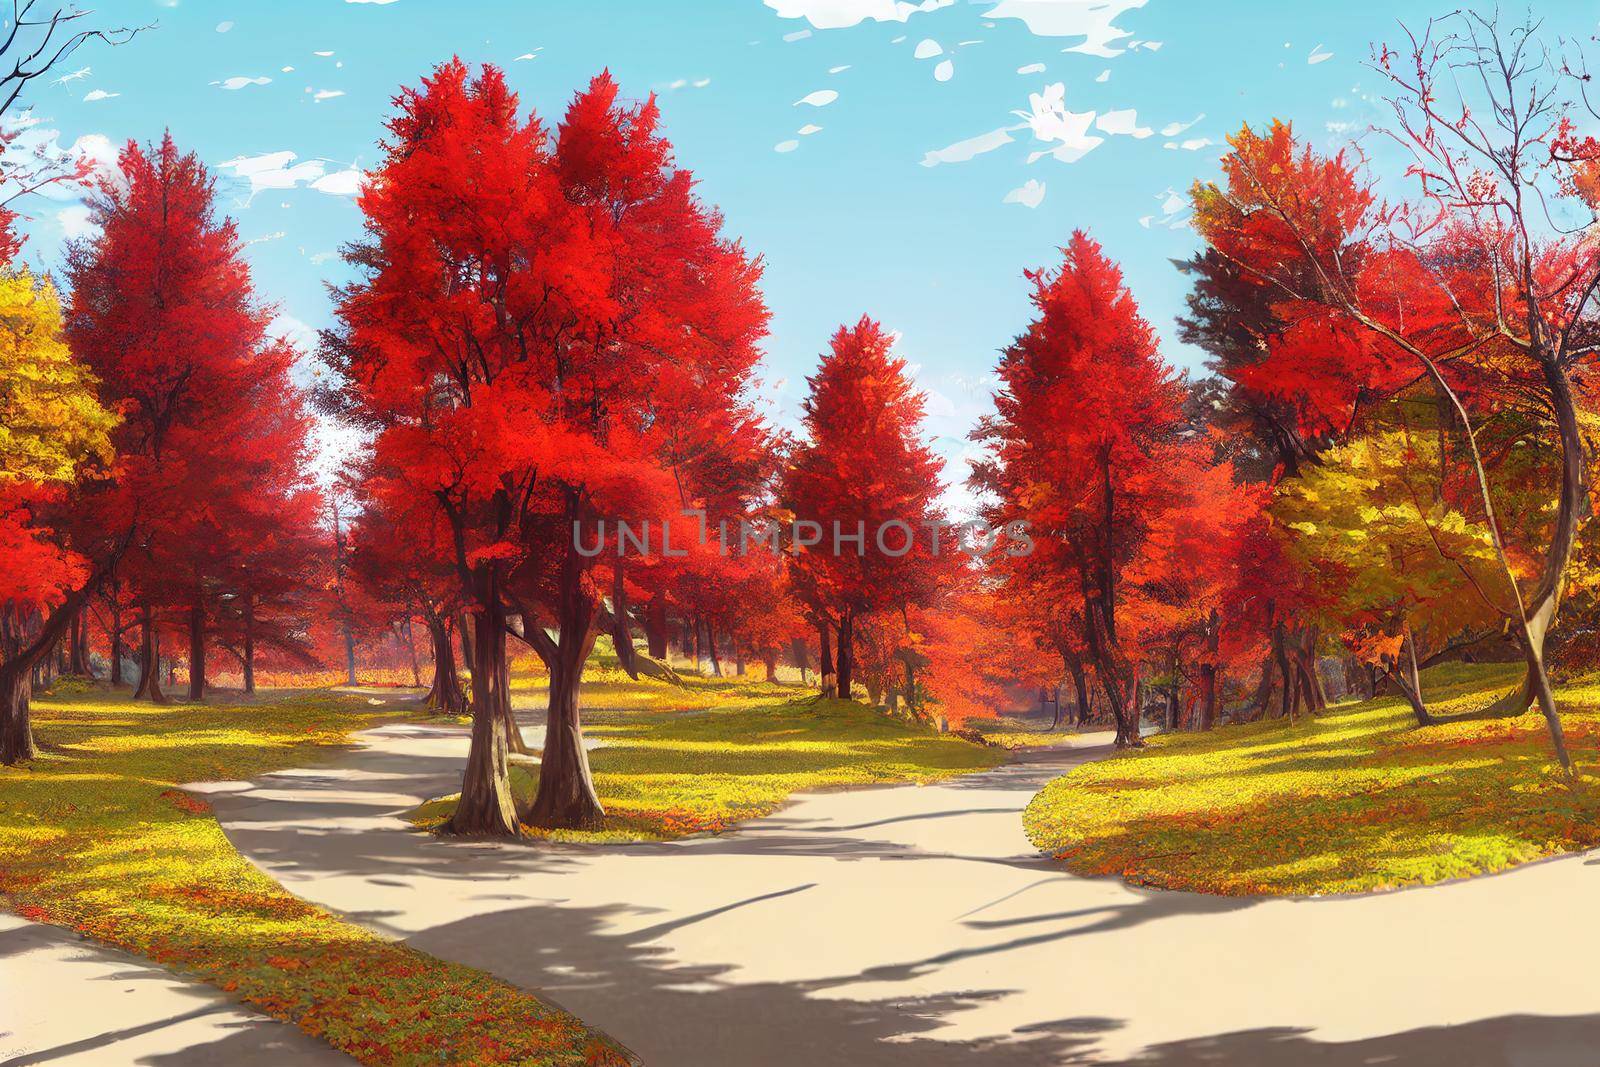 anime style, Autumn scene of red maple trees in forest park 2d by 2ragon